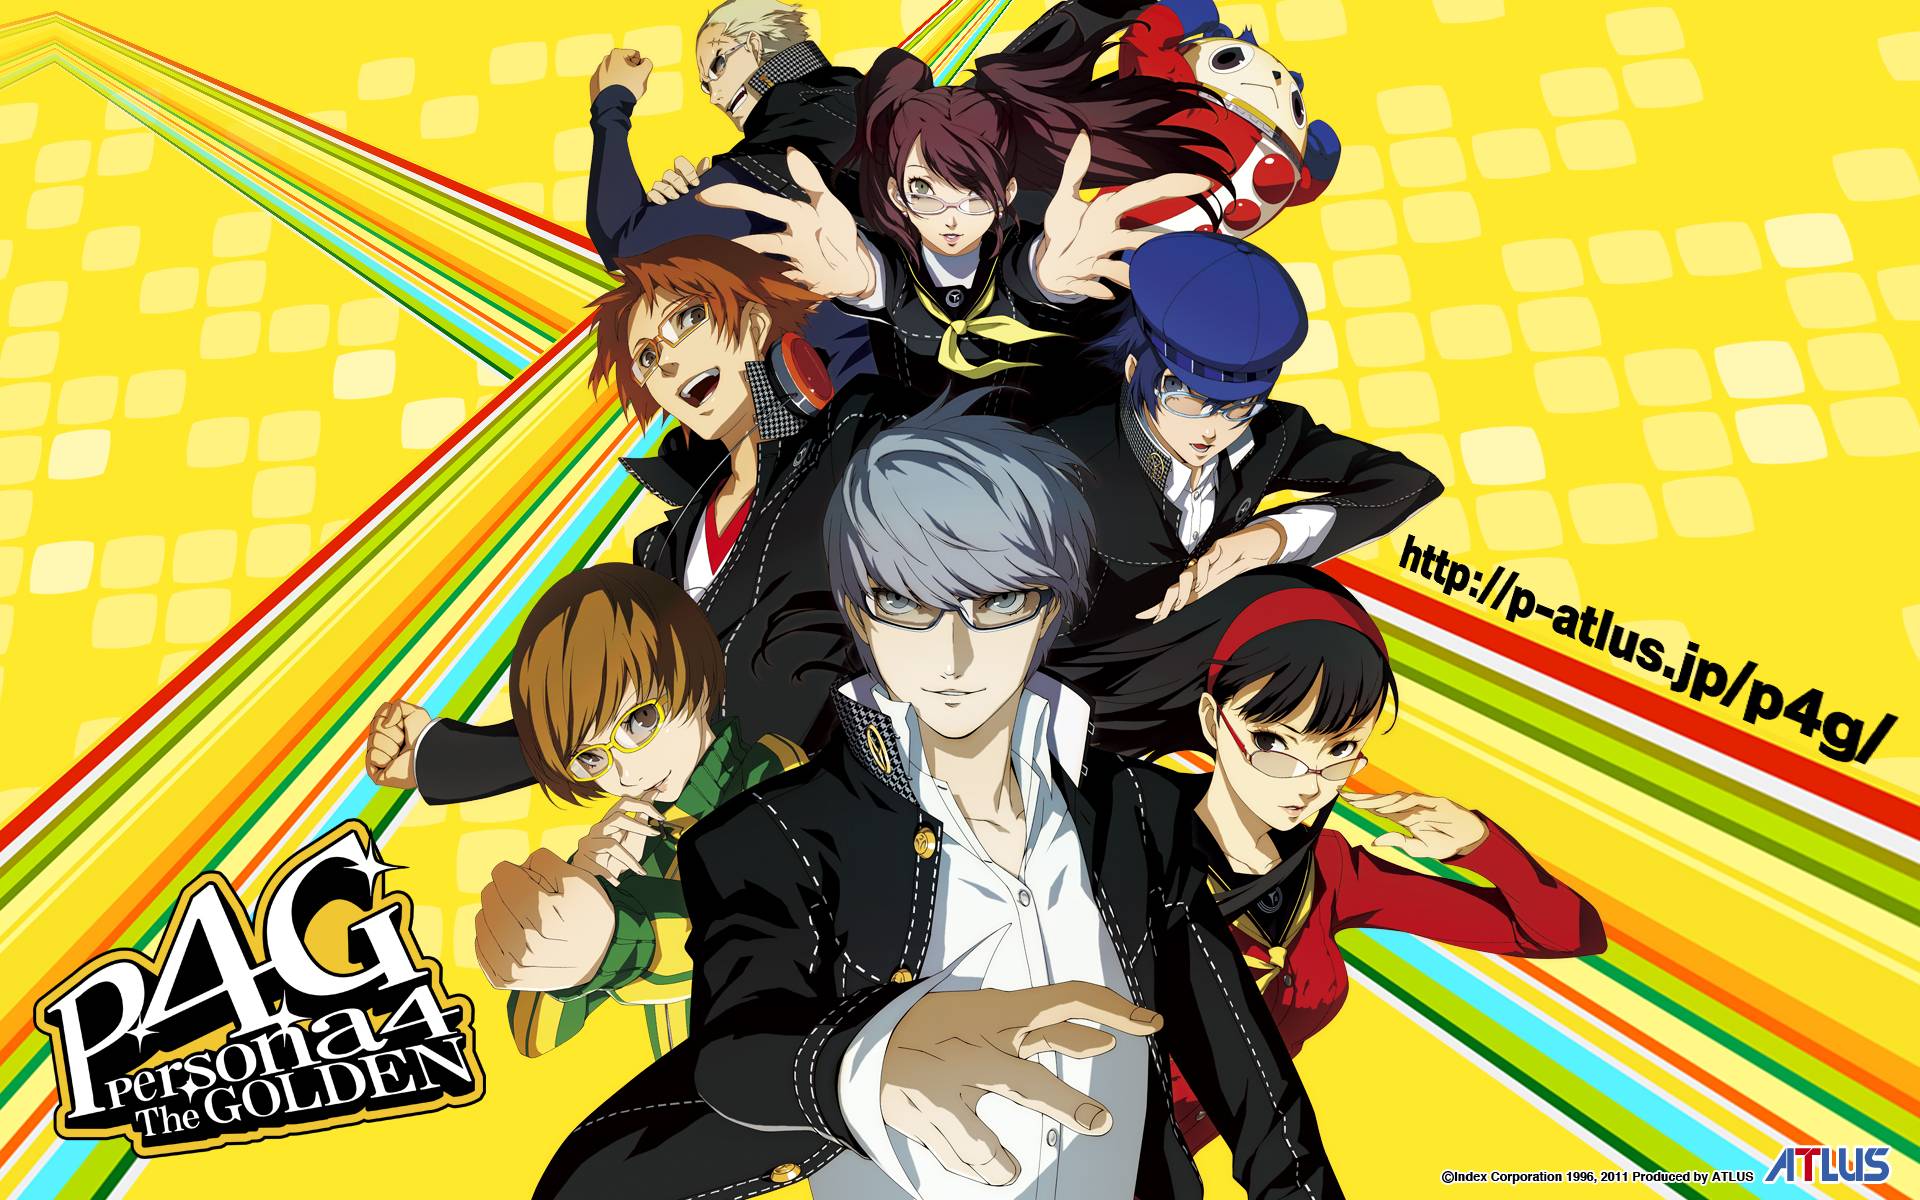 10 Persona 4 Golden HD Wallpapers and Backgrounds